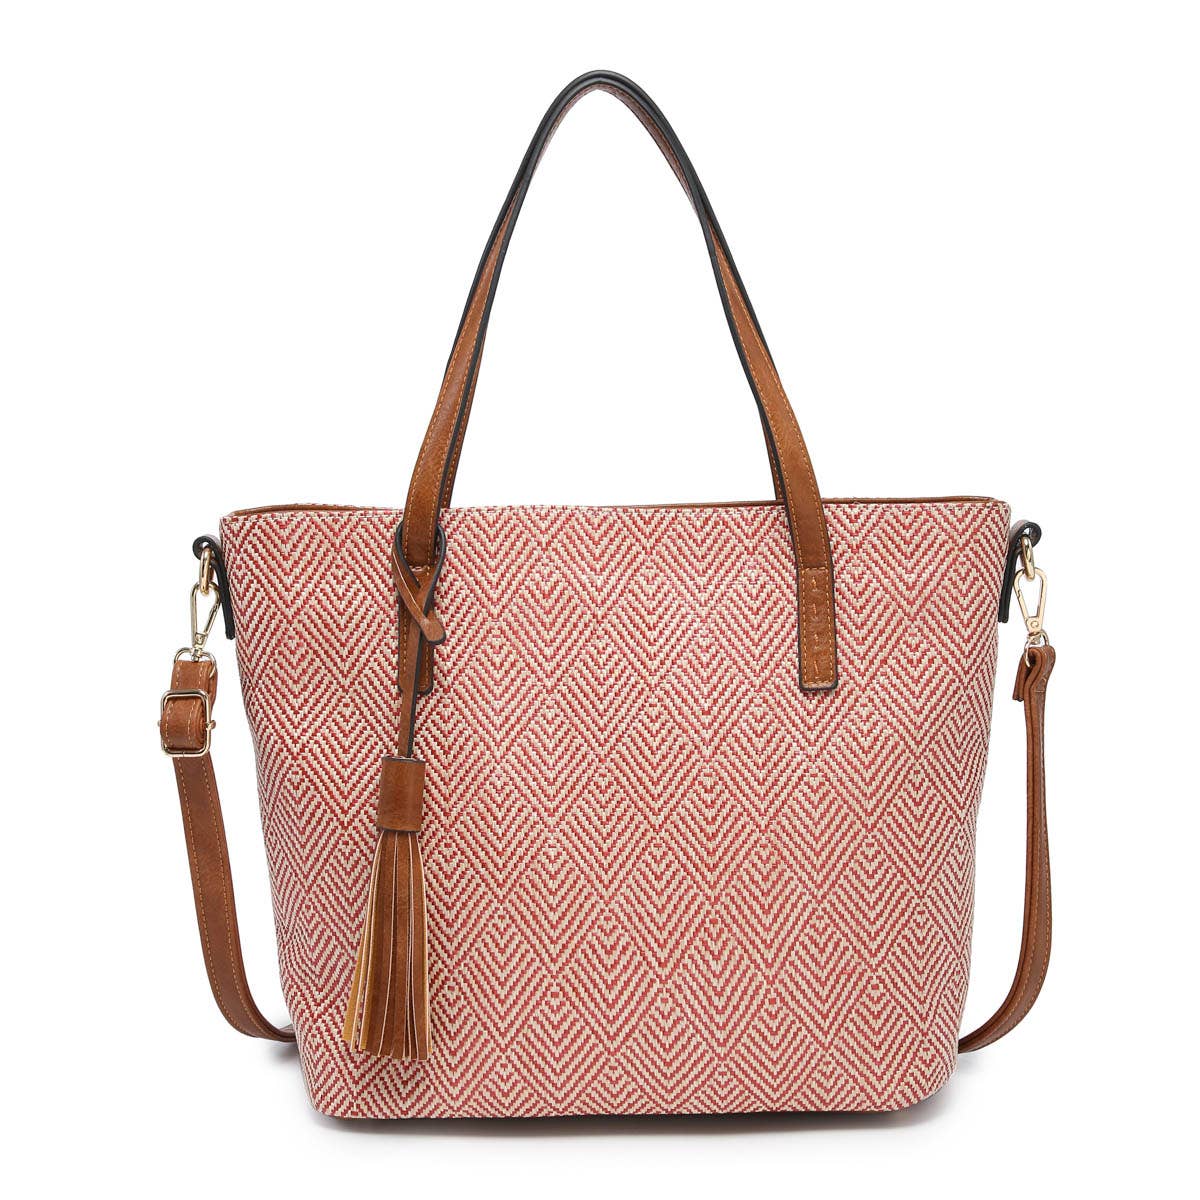 M1921 August 2 Tone Natural Tote